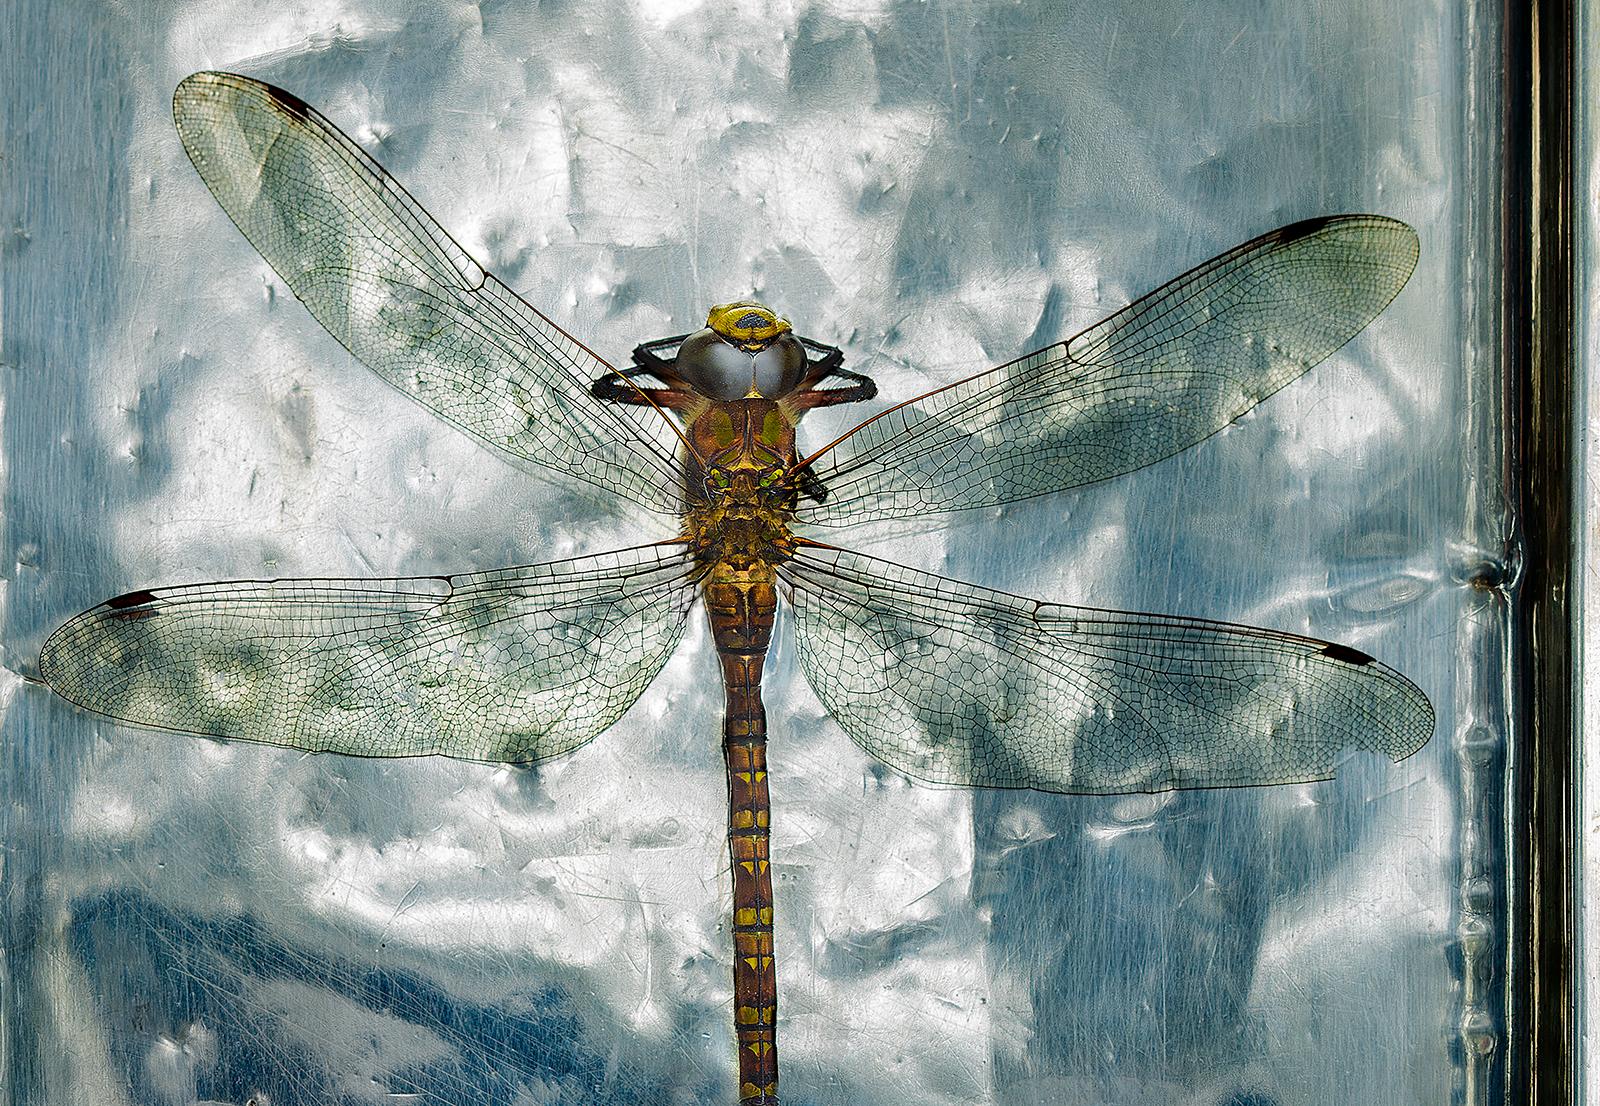 Dragonfly - Signed limited edition nature print, still life colour photo, insect - Photograph by Ian Sanderson